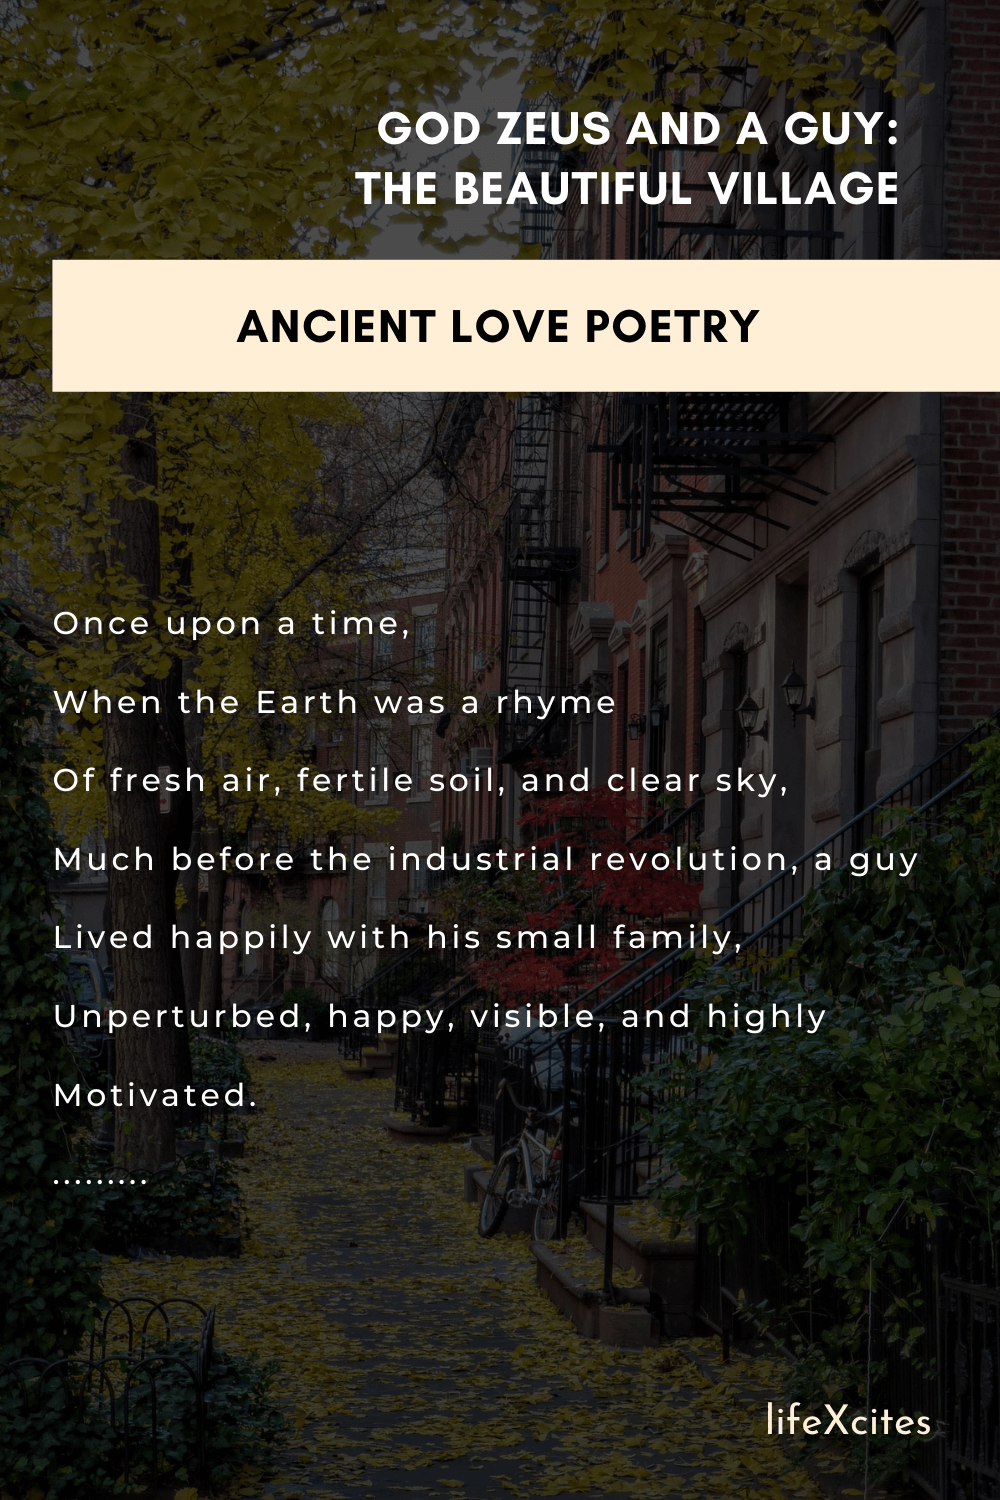 Ancient Love Poetry The Beautiful Village